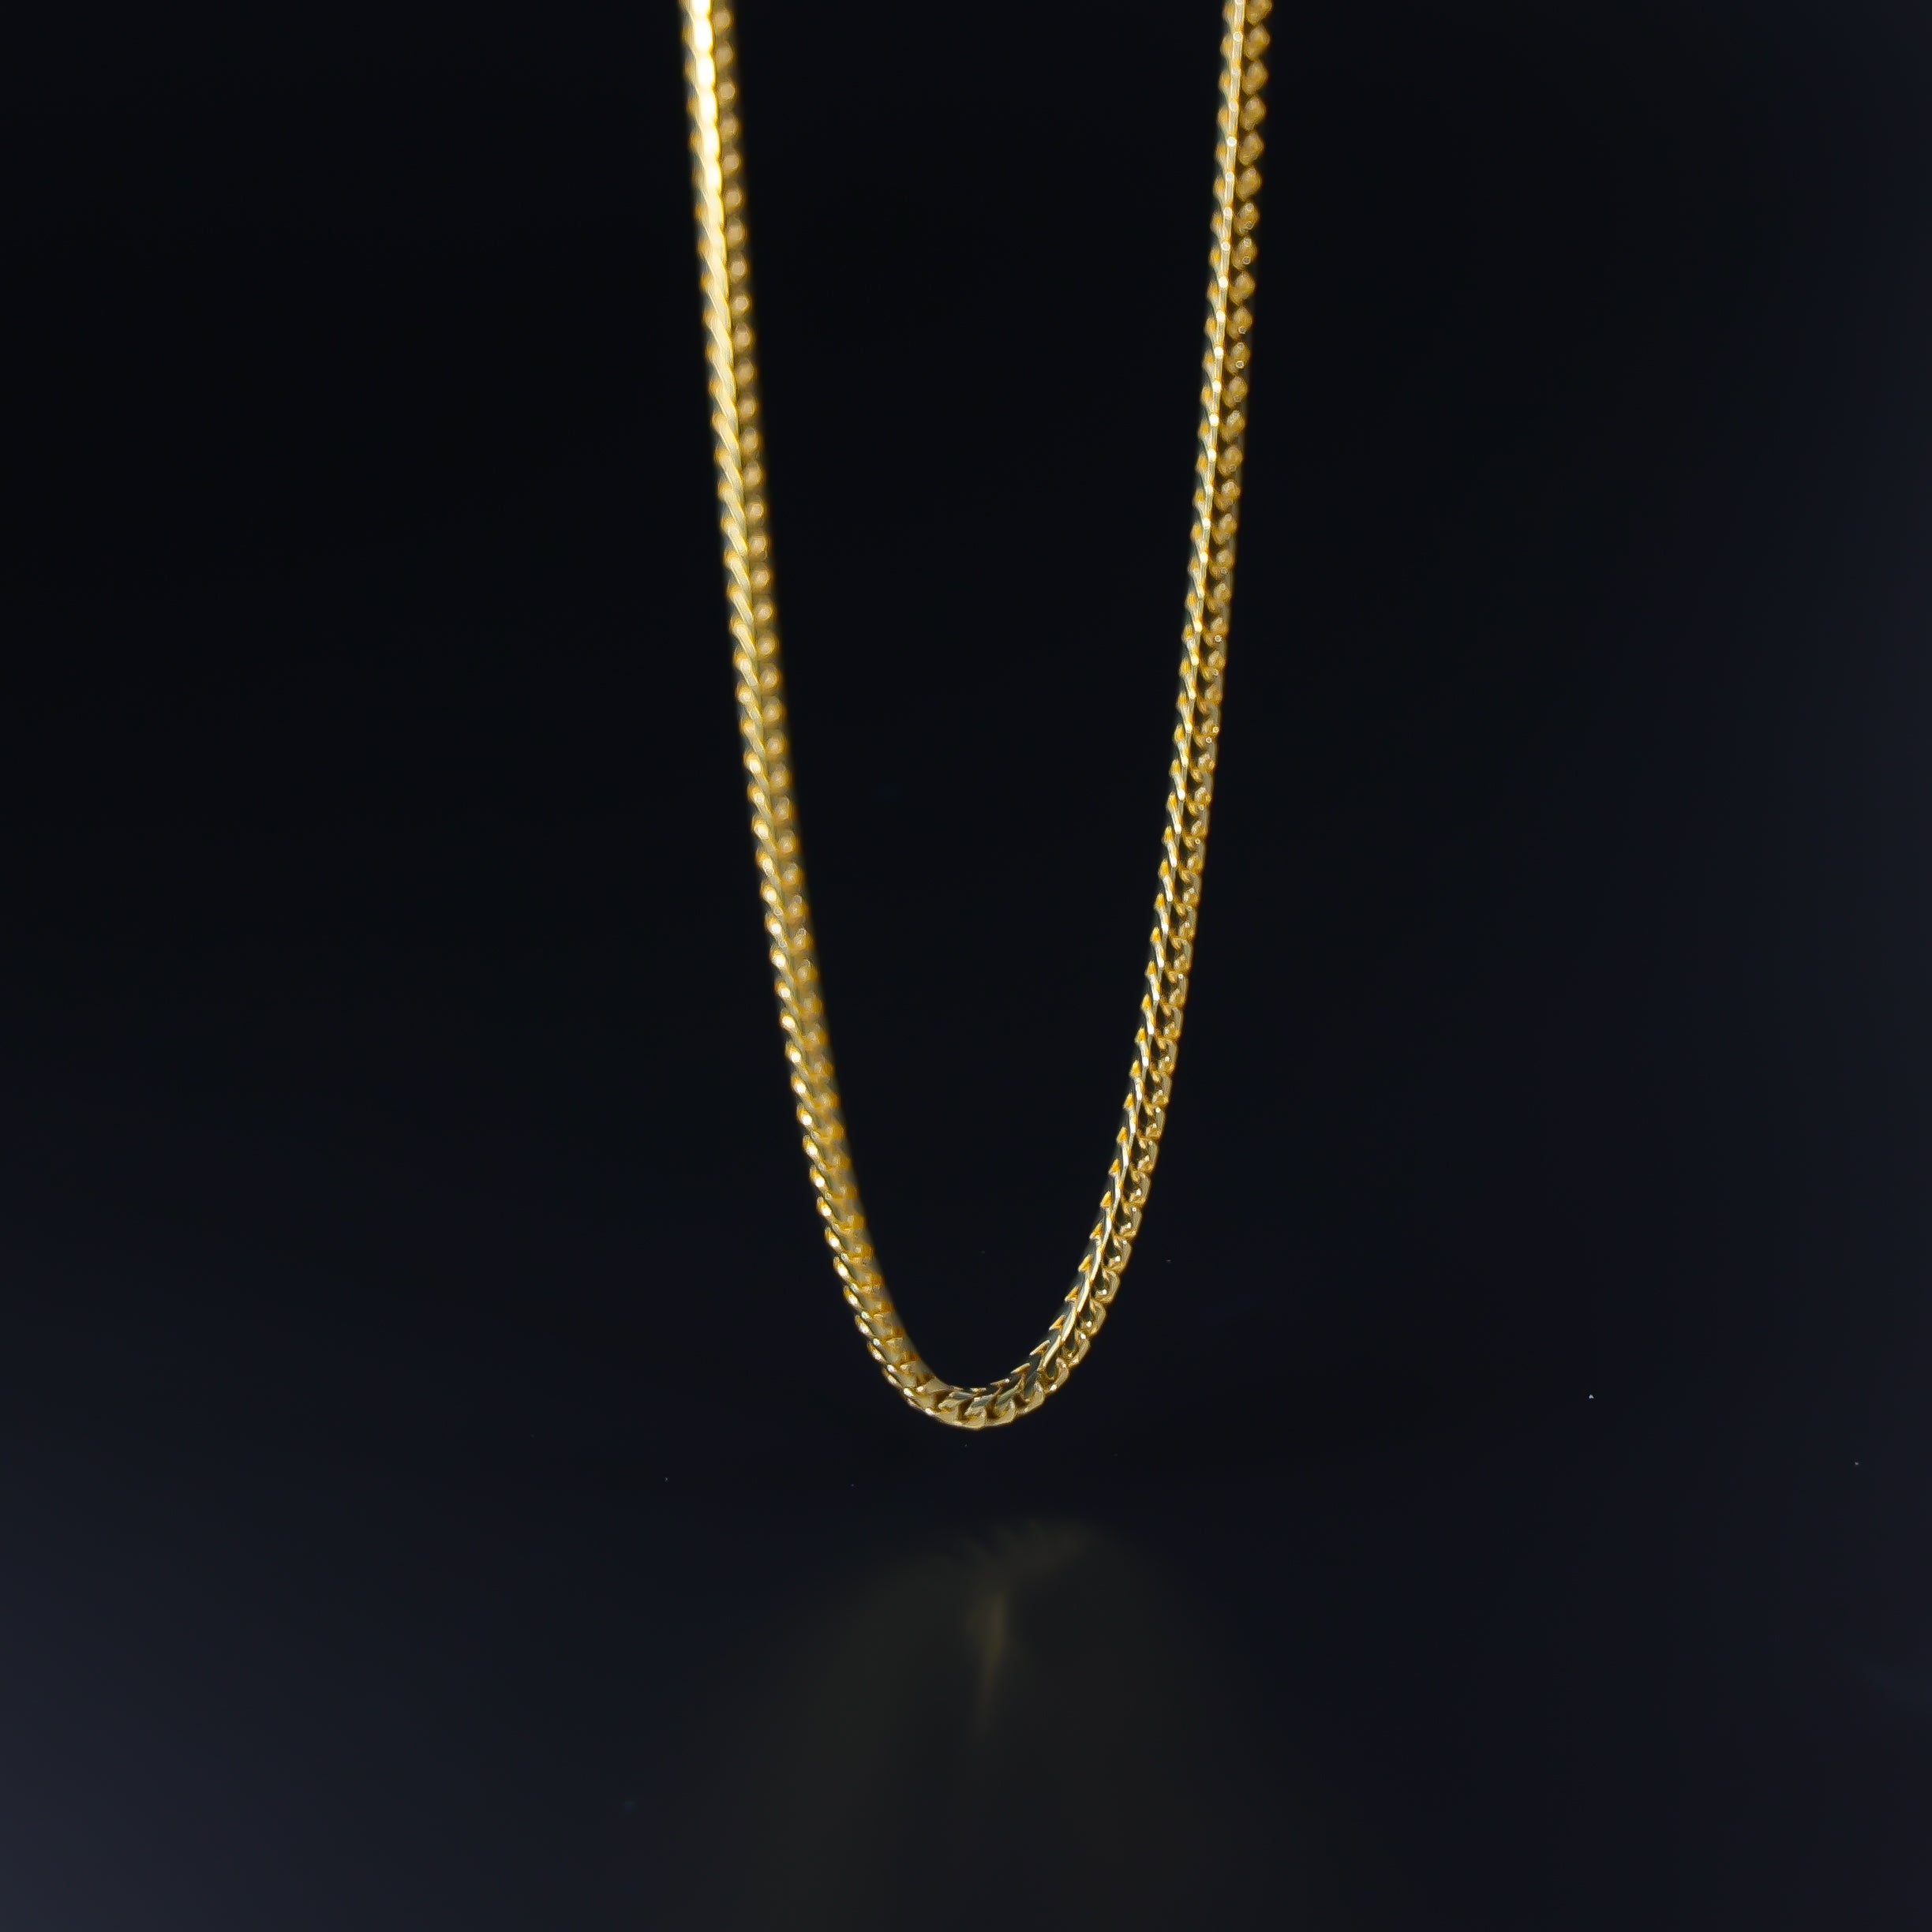 Gold 1.6mm Solid Franco Chain Model-0407 - Charlie & Co. Jewelry